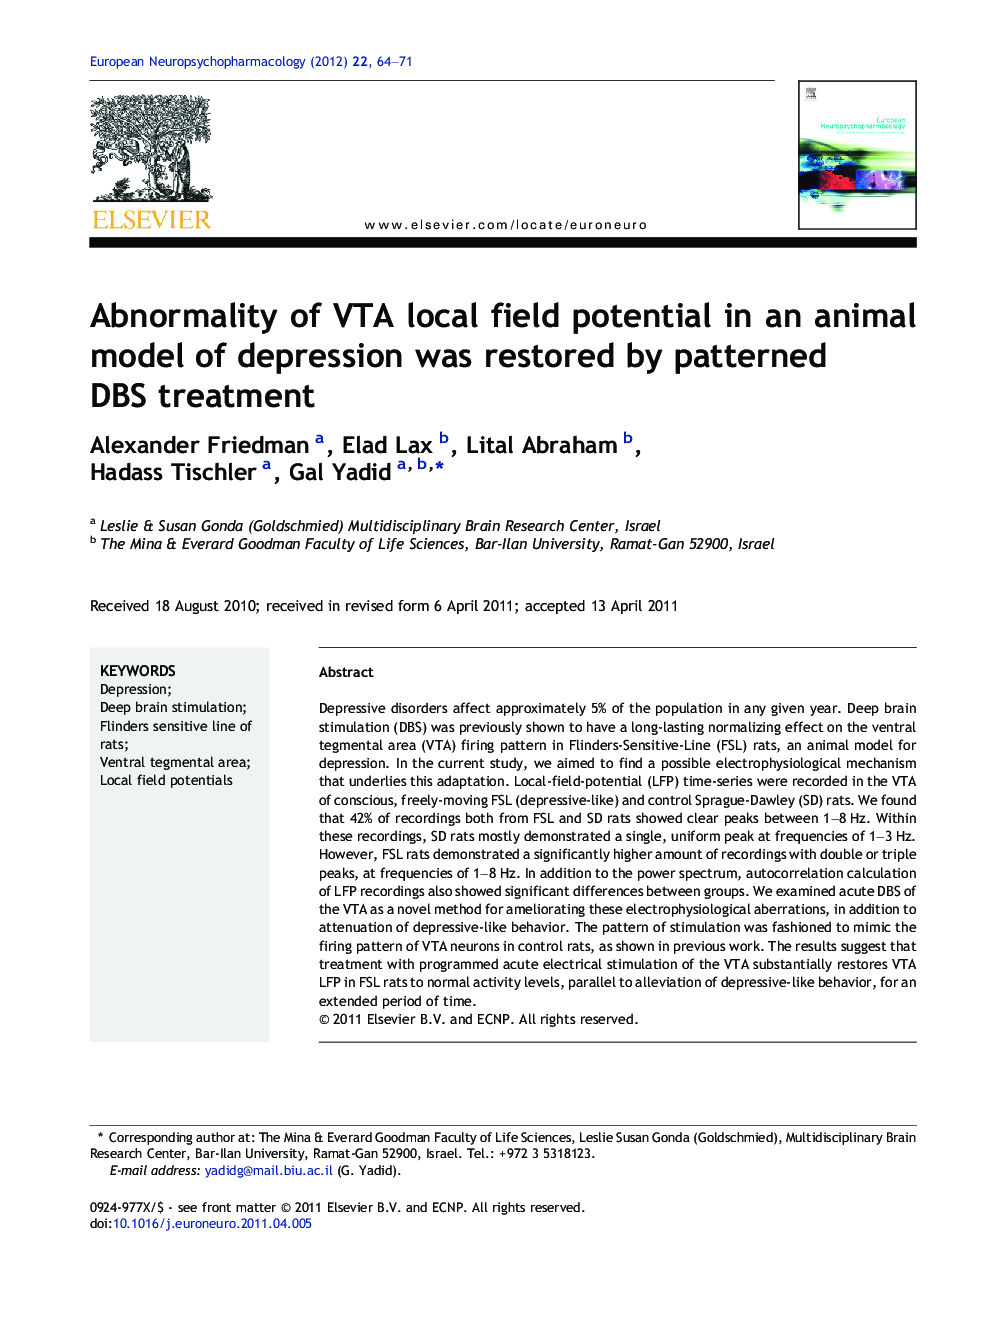 Abnormality of VTA local field potential in an animal model of depression was restored by patterned DBS treatment